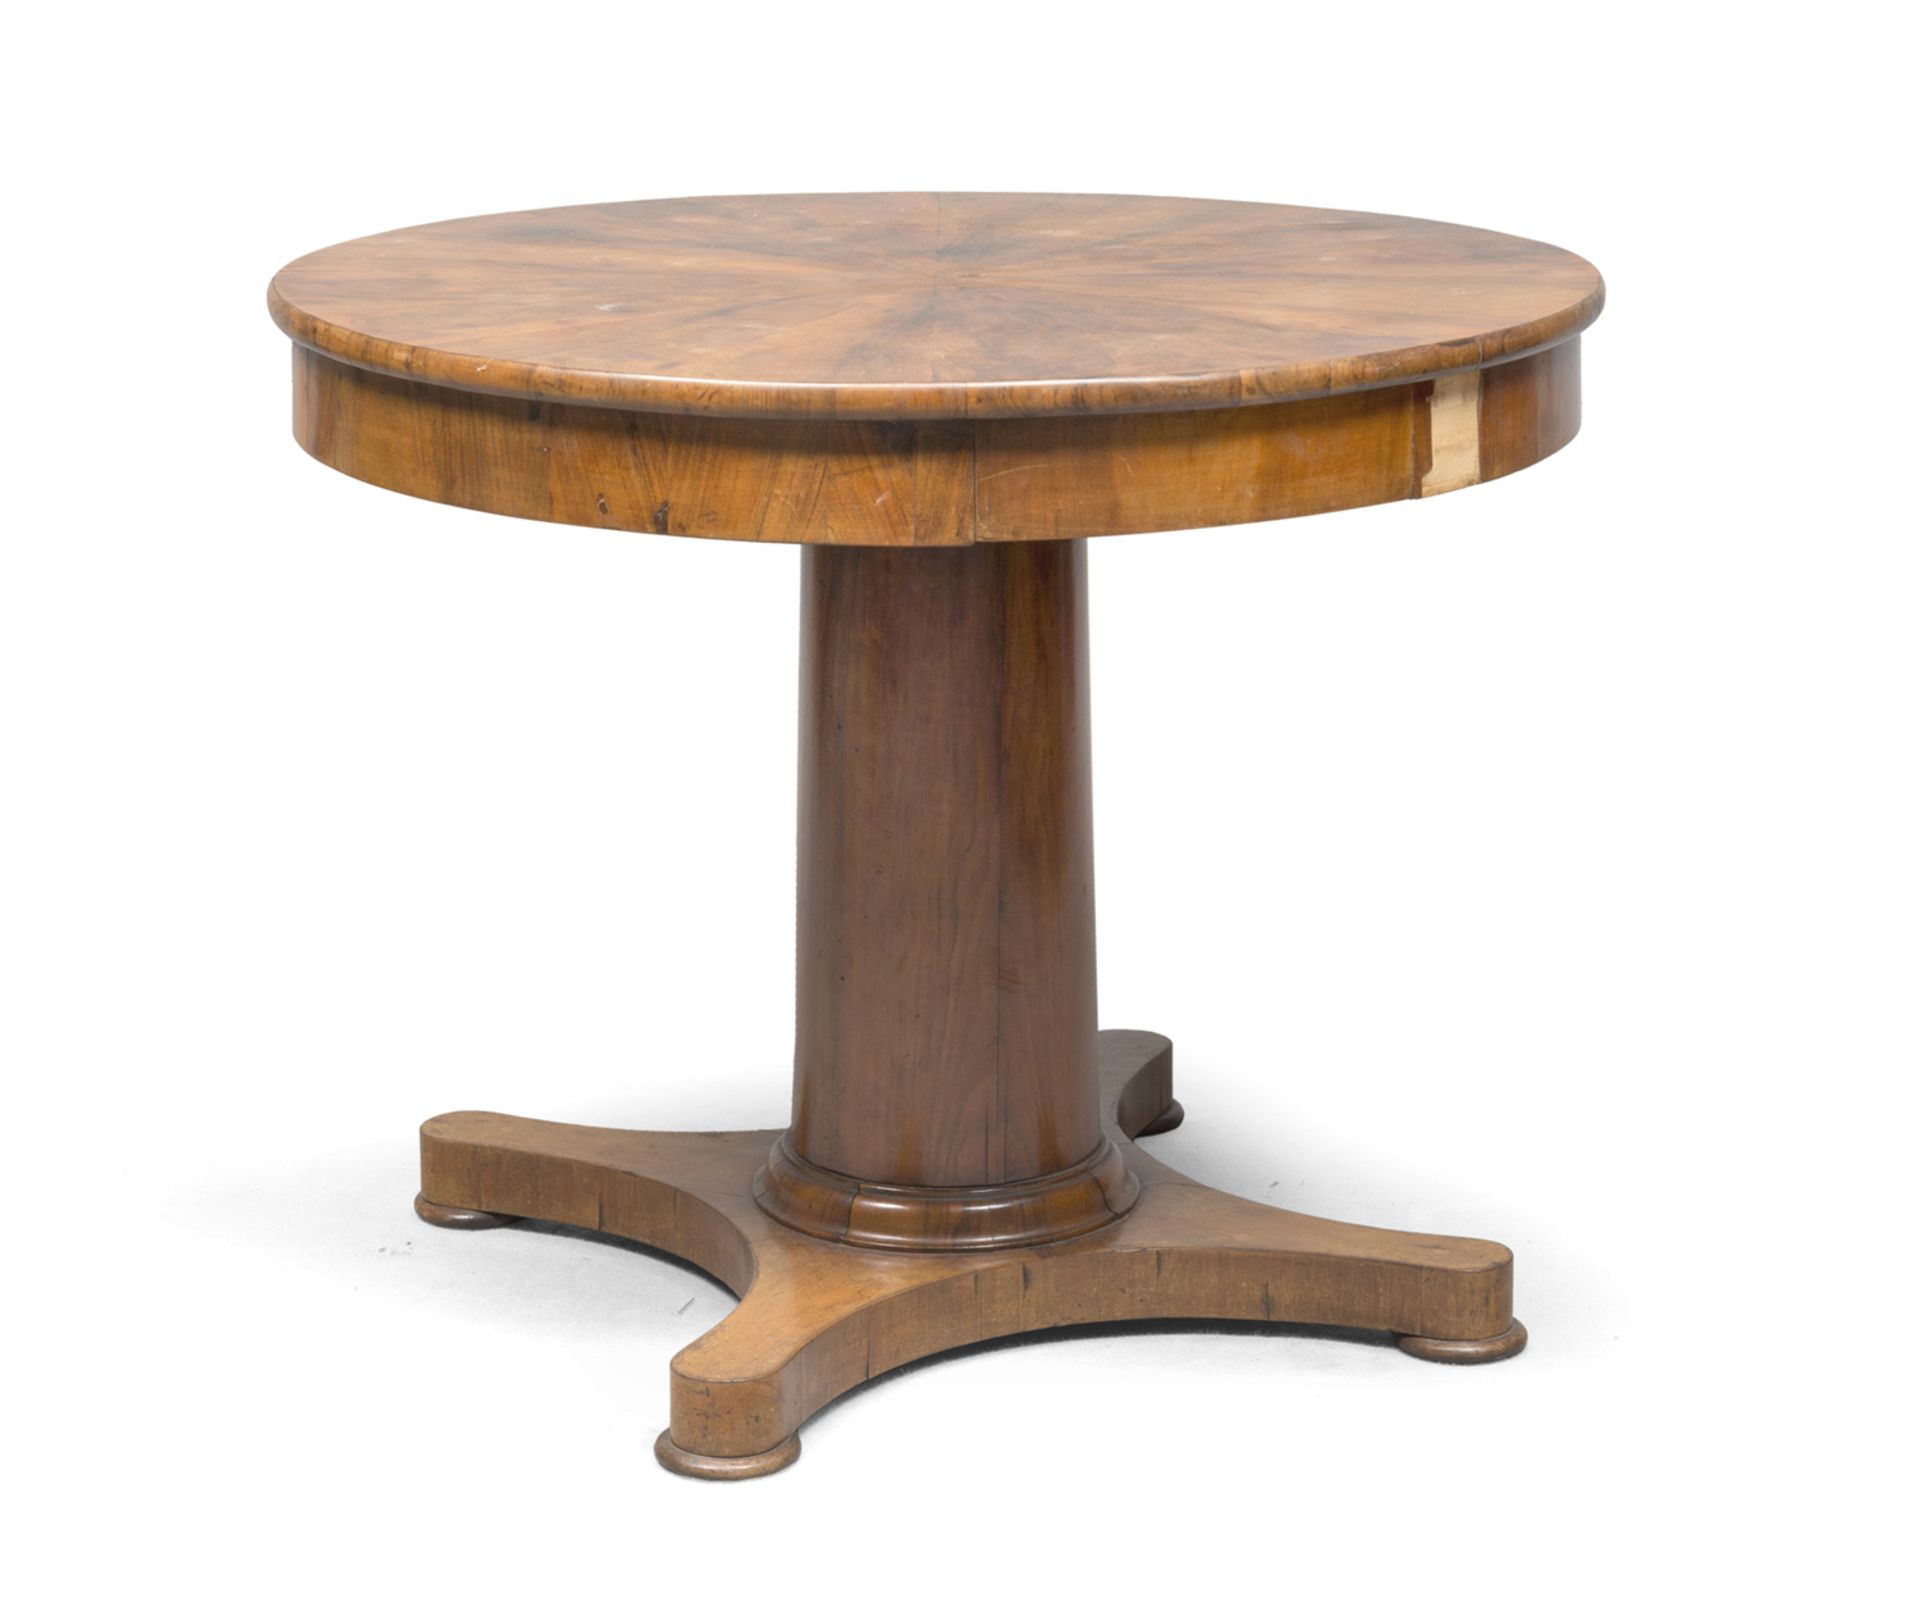 ROUND TABLE IN WALNUT CENTRAL ITALY 19TH CENTURY